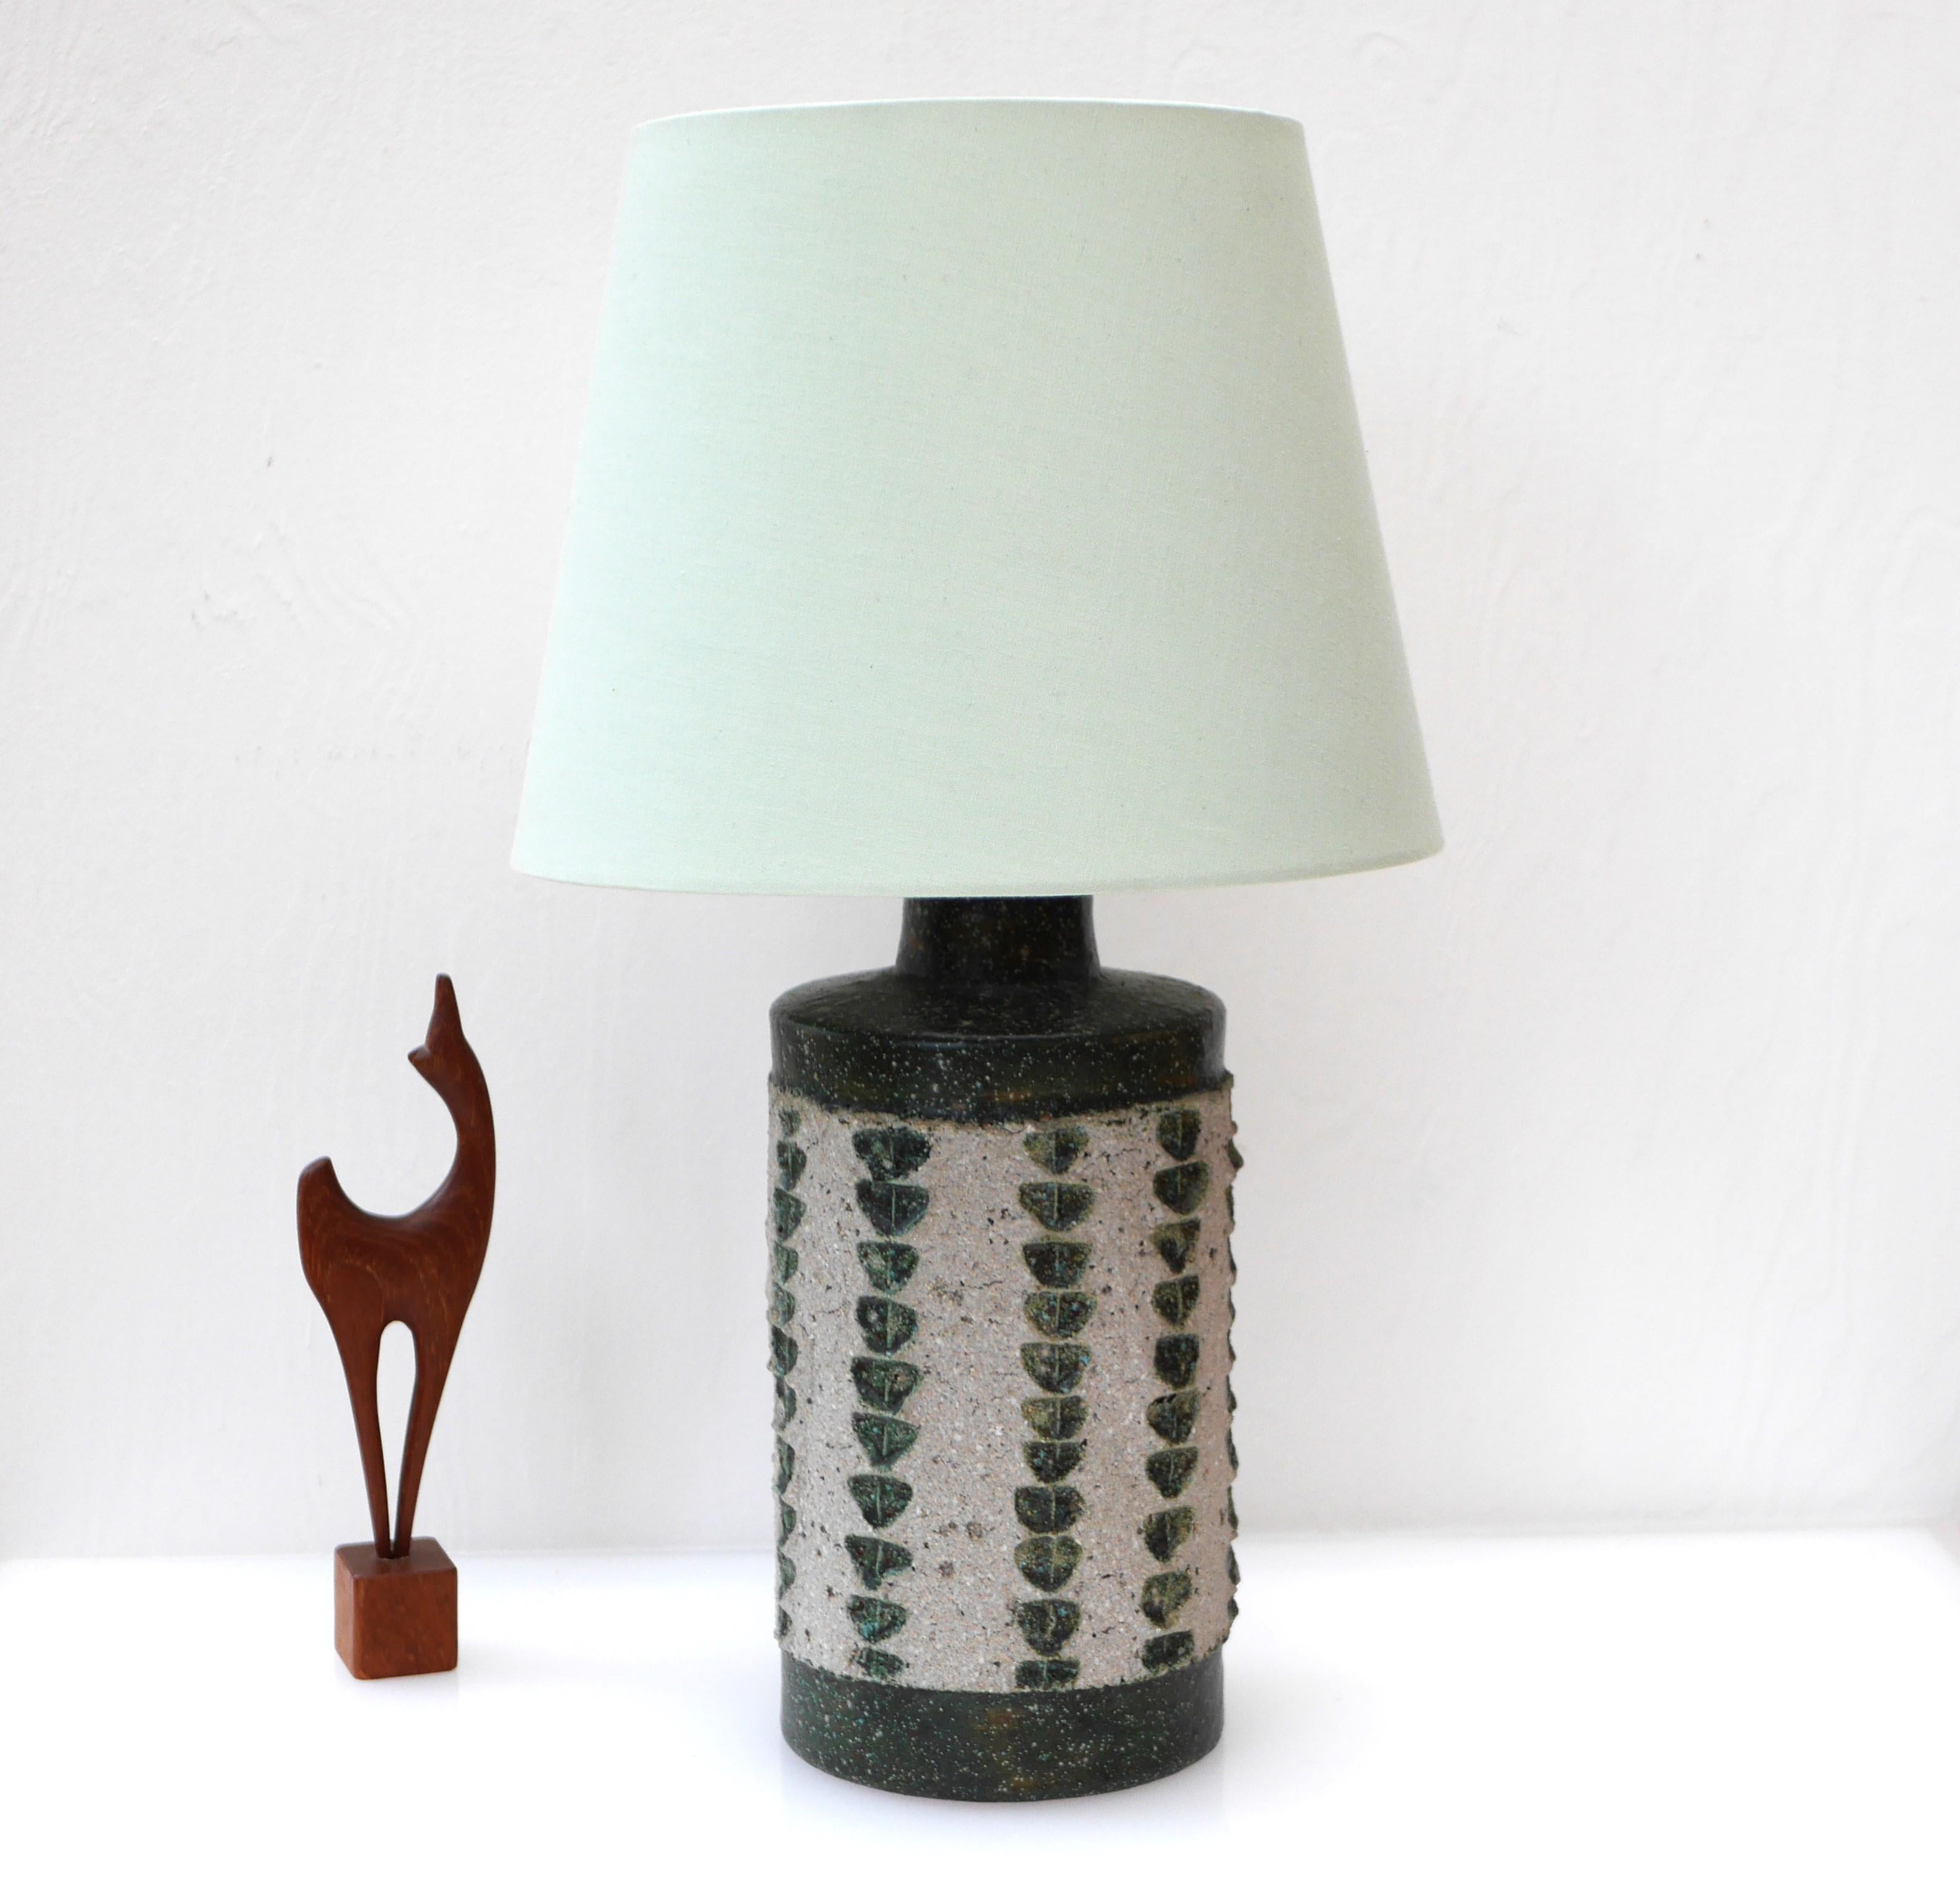 An extraordinary vintage table lamp with an exceptional glazing, a great example of Scandinavian Mid-century modern design. A very special and rather large ceramic lamp base, made by talented Thomas Hellström for Nittsjö Keramik, Sweden. This lamp